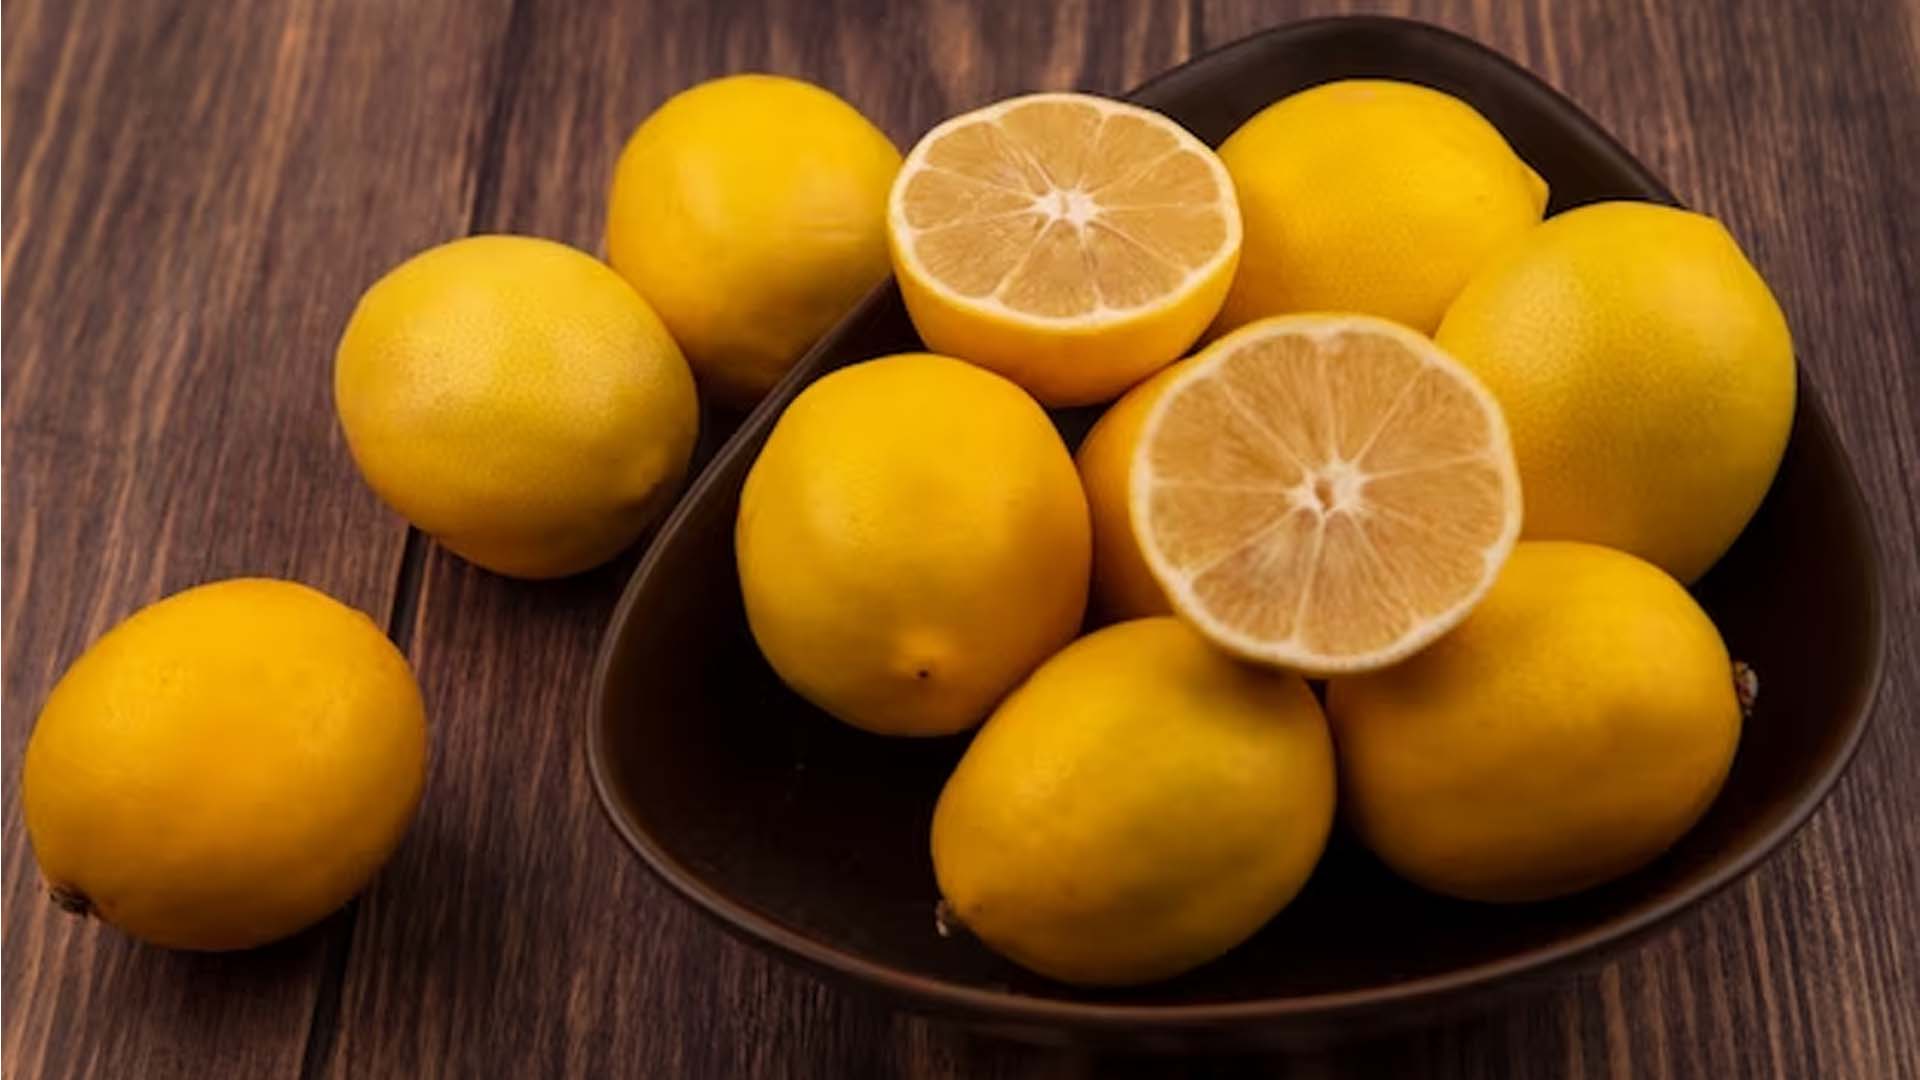 Does Lemon Cause Acidity in Stomach?